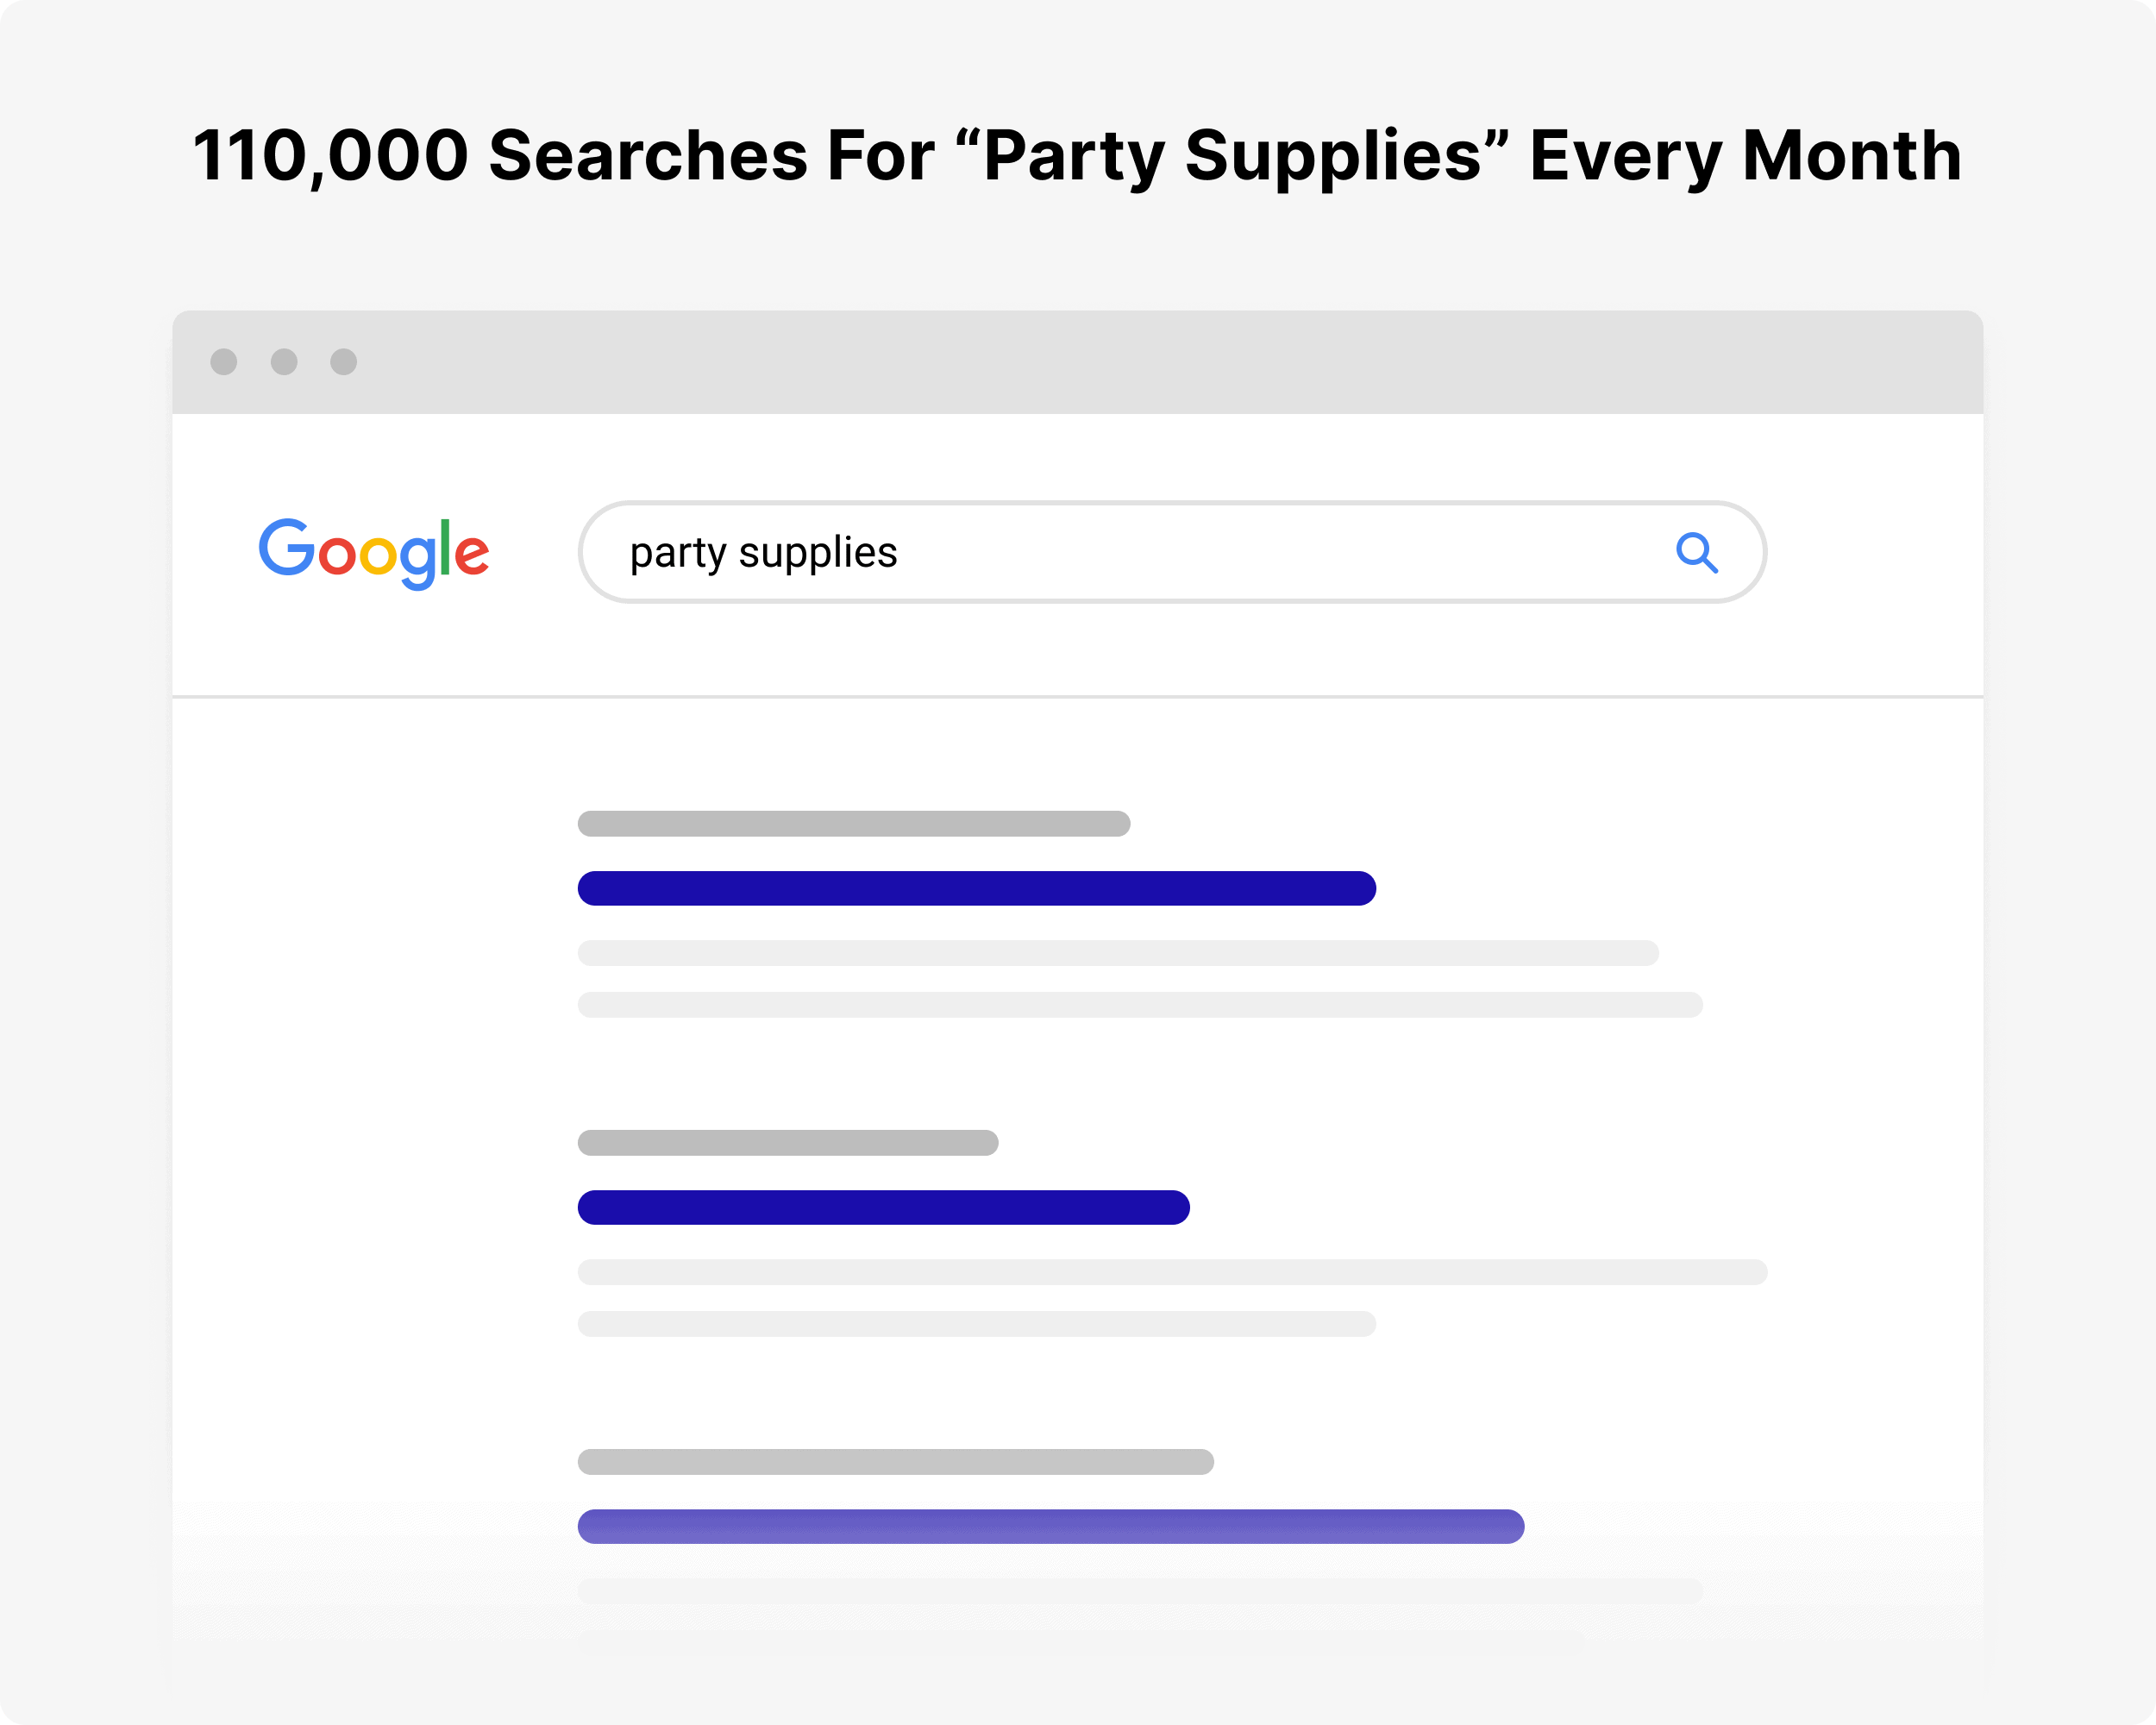 Number of searches